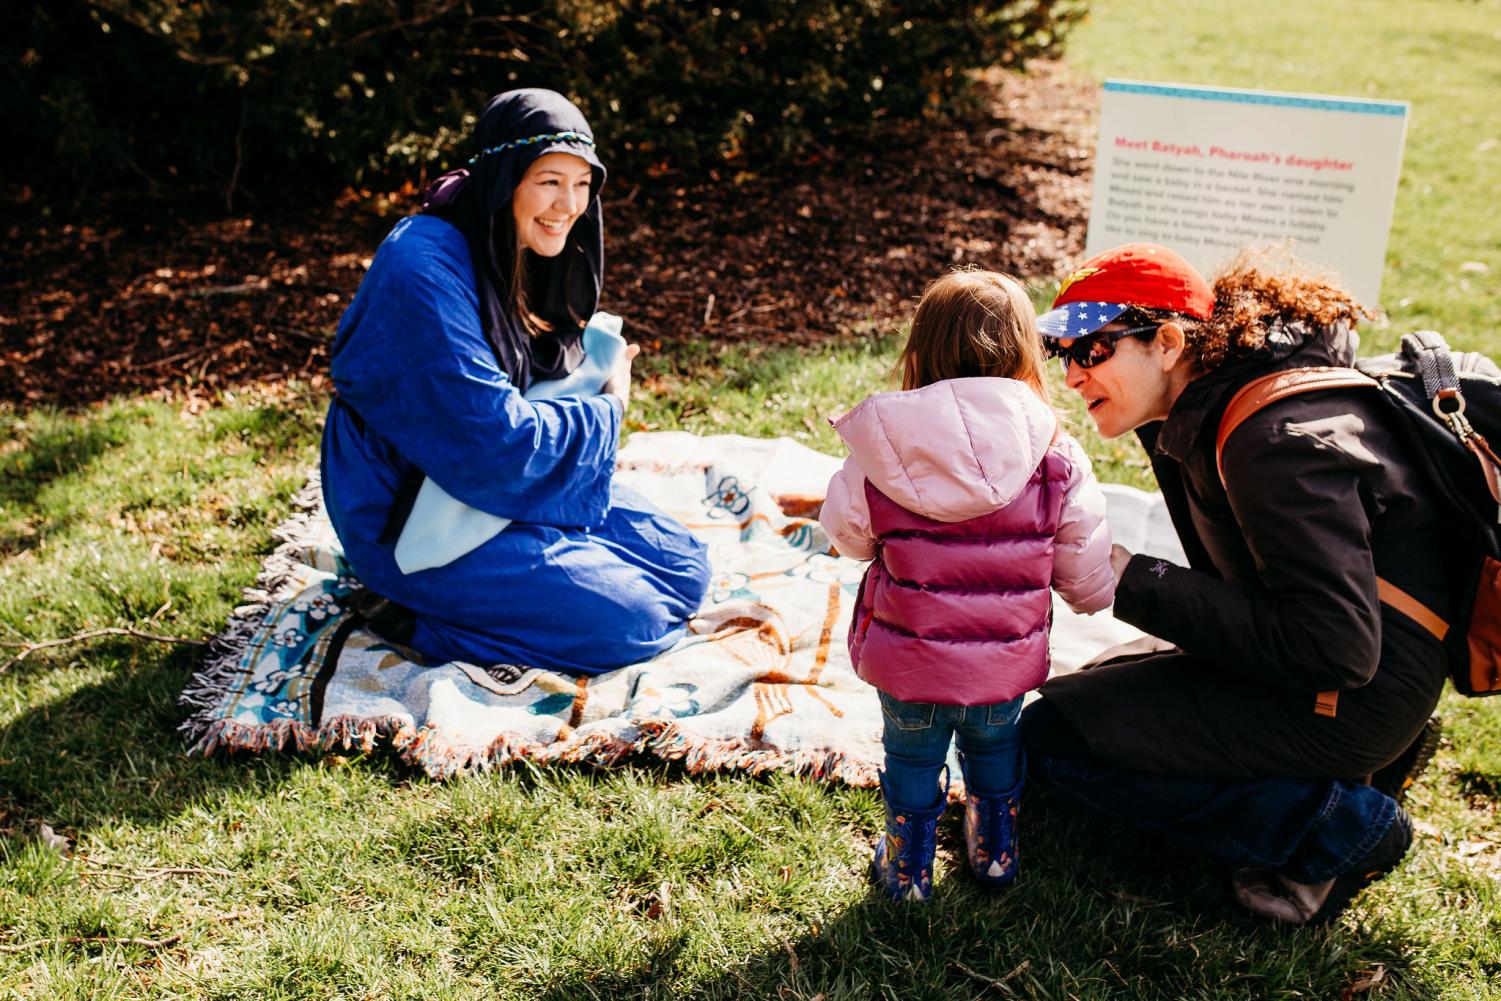 A+woman+in+costume+acts+out+the+story+of+Passover+at+JUF%E2%80%99s+Young+Families+Program+Passover+celebration+at+Morton+Arboretum.+She+sits+on+a+blanket+on+the+grass+smiling+at+a+little+girl.+The+girl%E2%80%99s+mom+crouches+next+to+her+and+speaks+to+her.